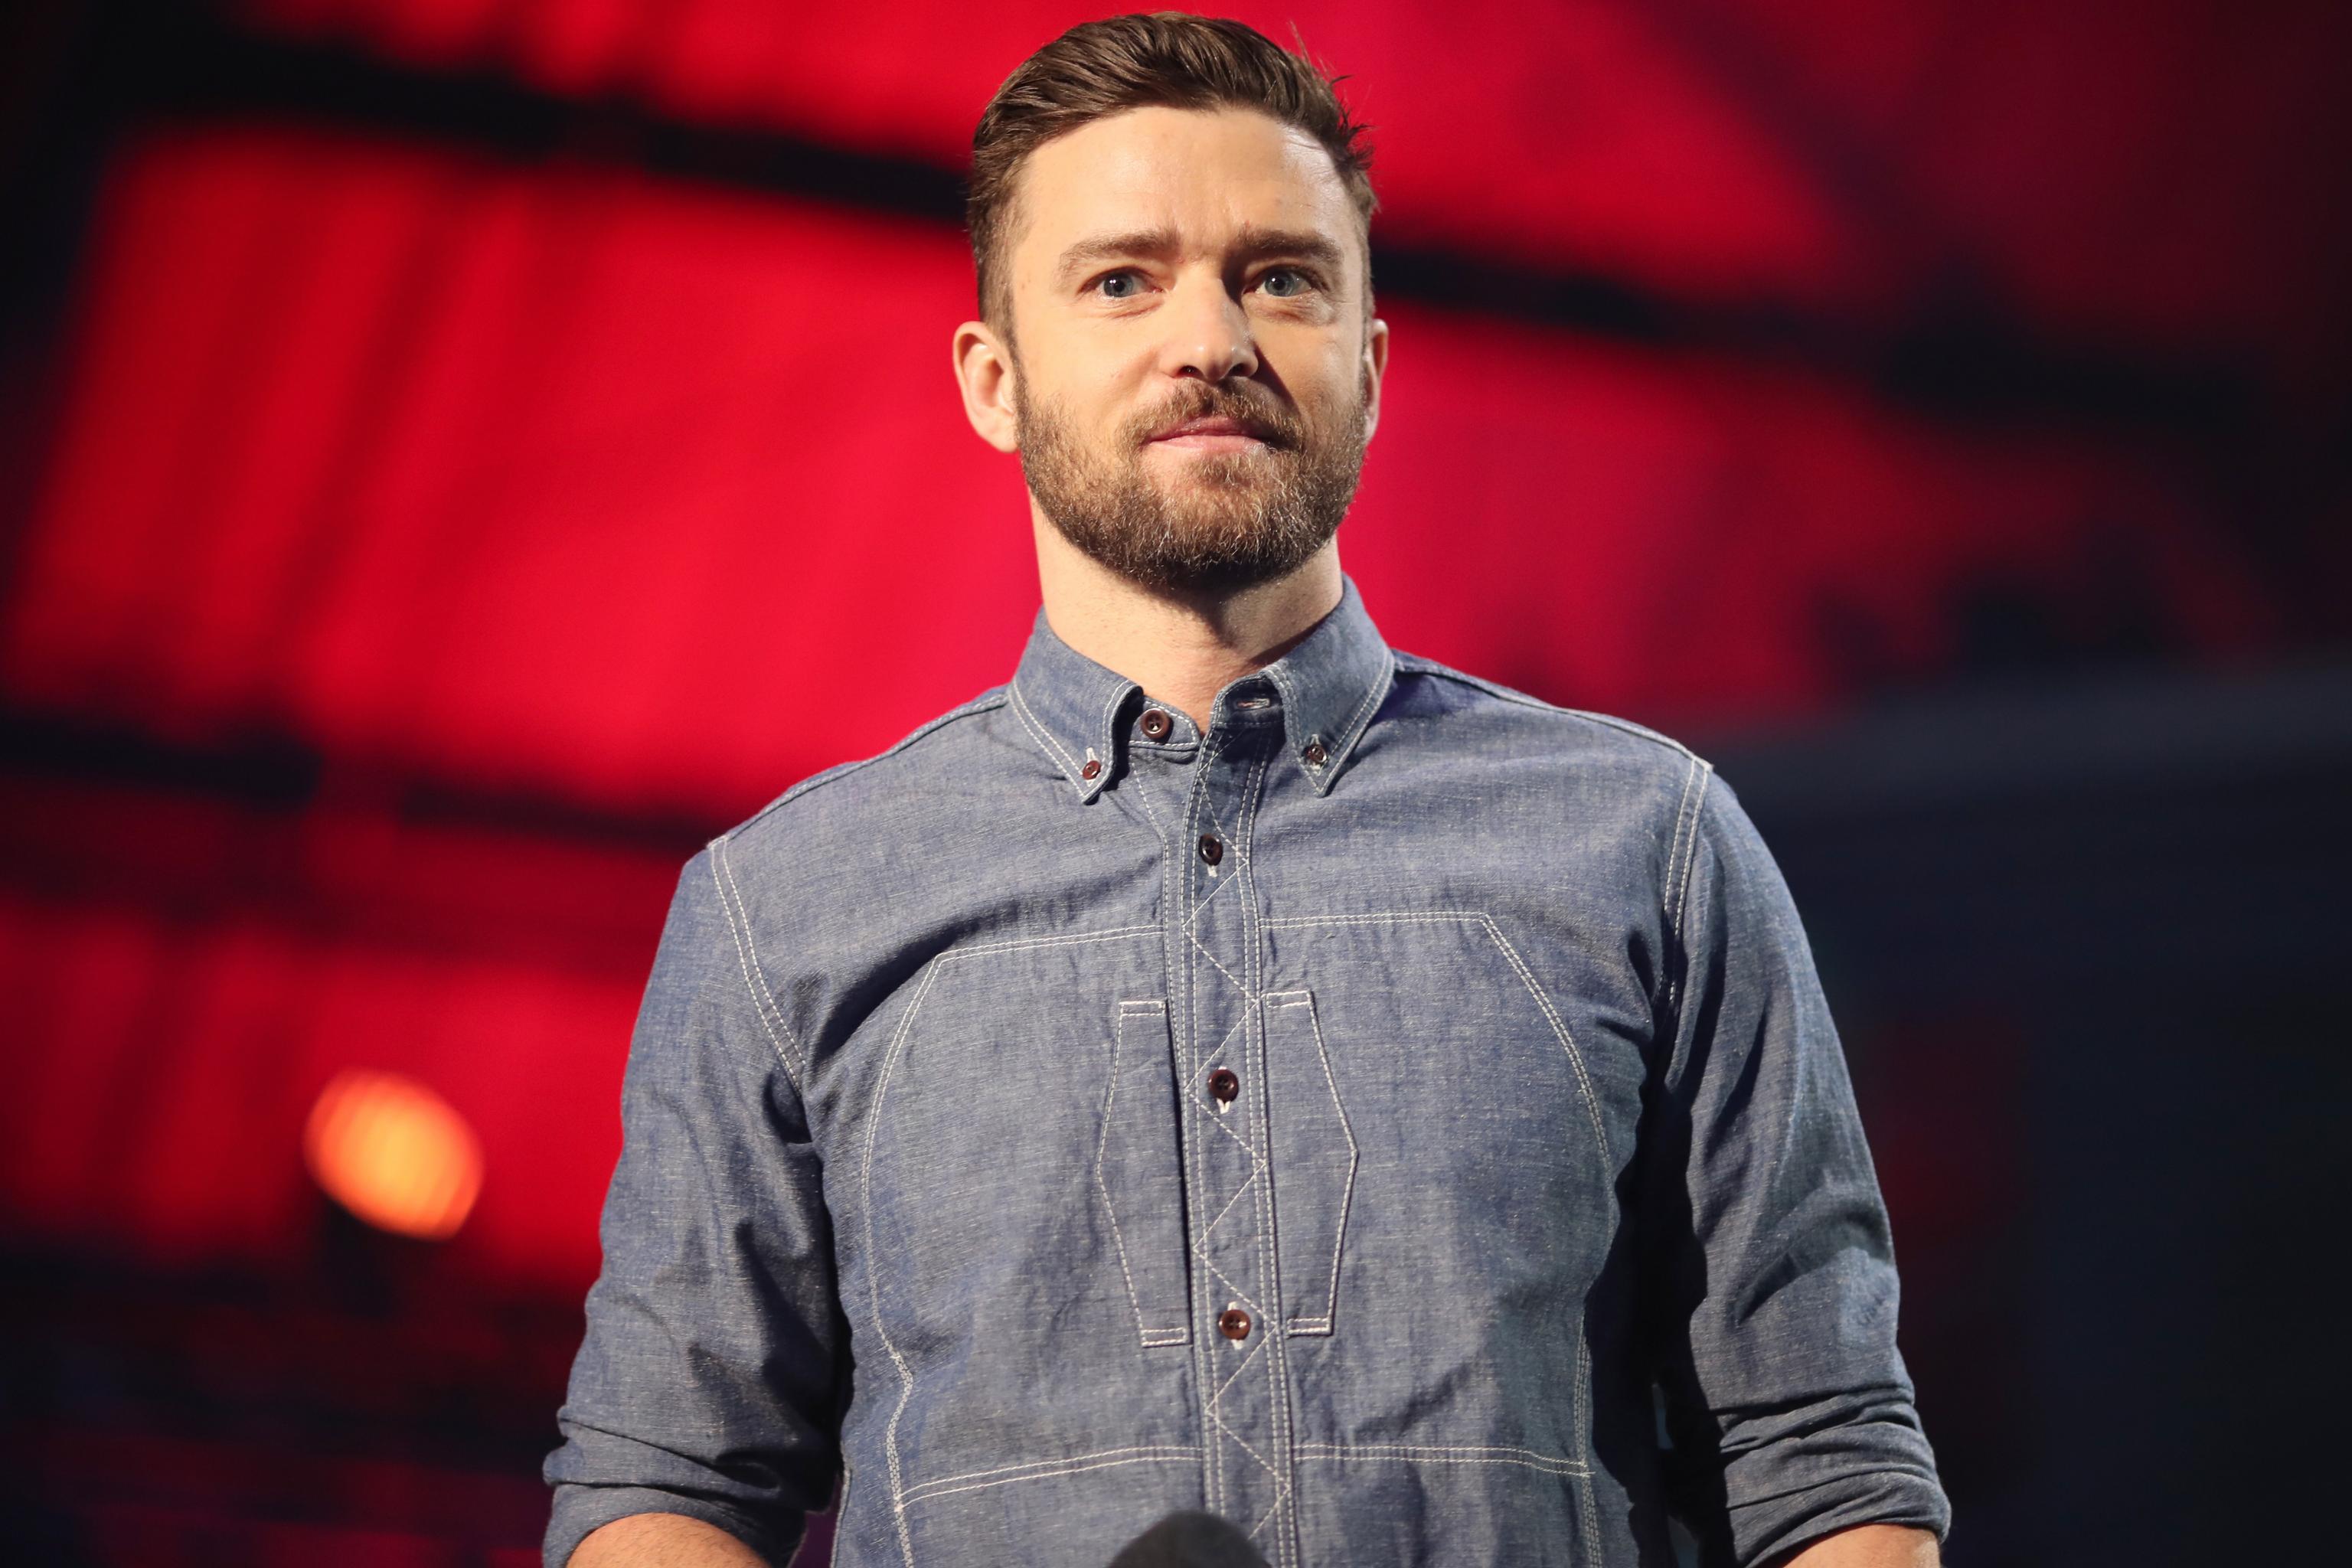 Justin Timberlake slammed after being announced for 2018 